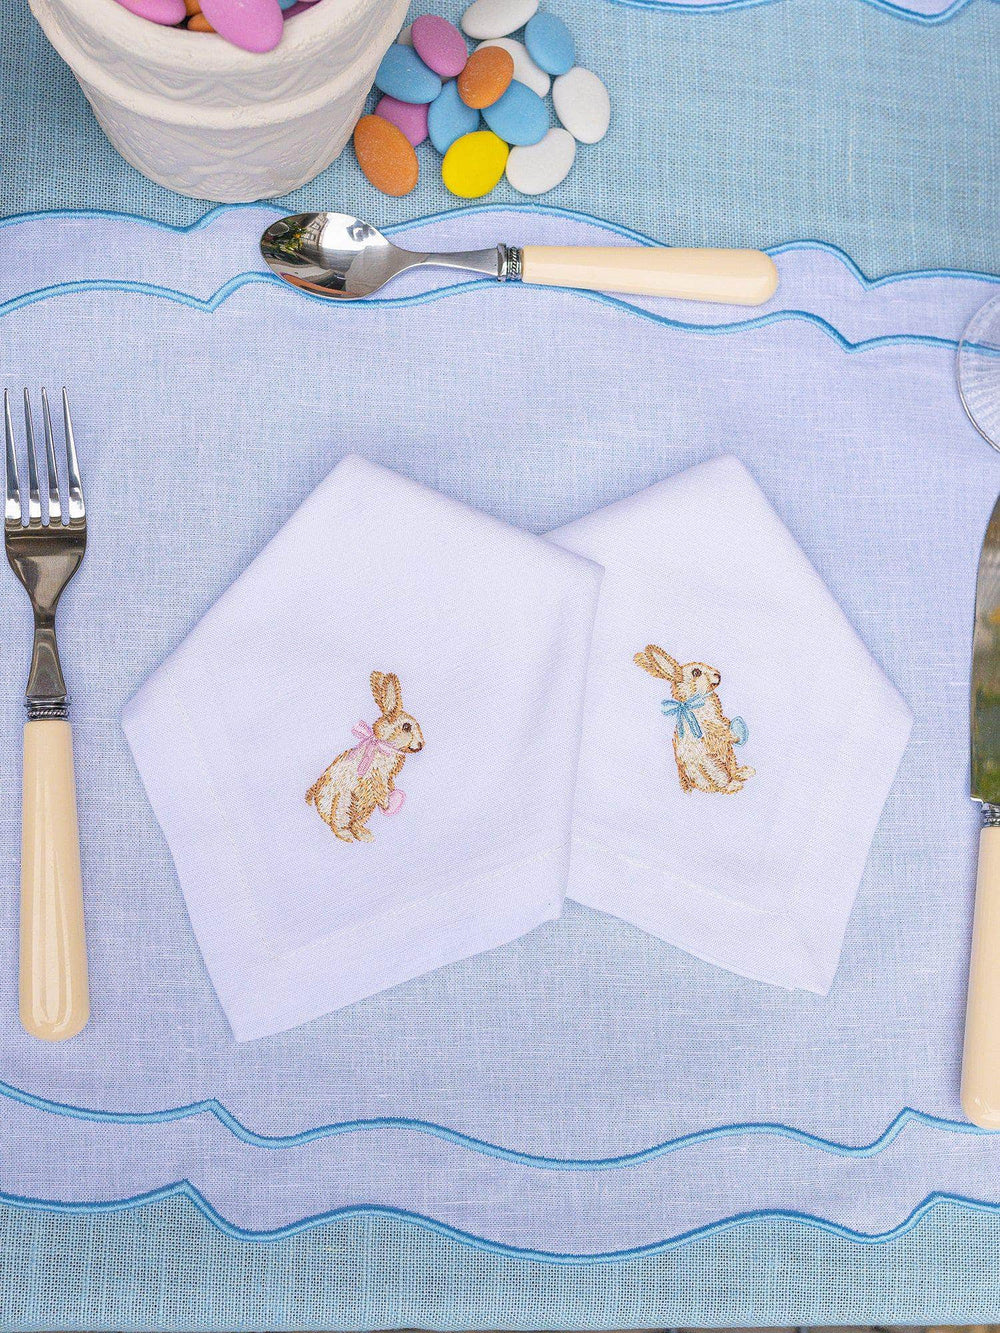 Pink Easter Bunny Napkin